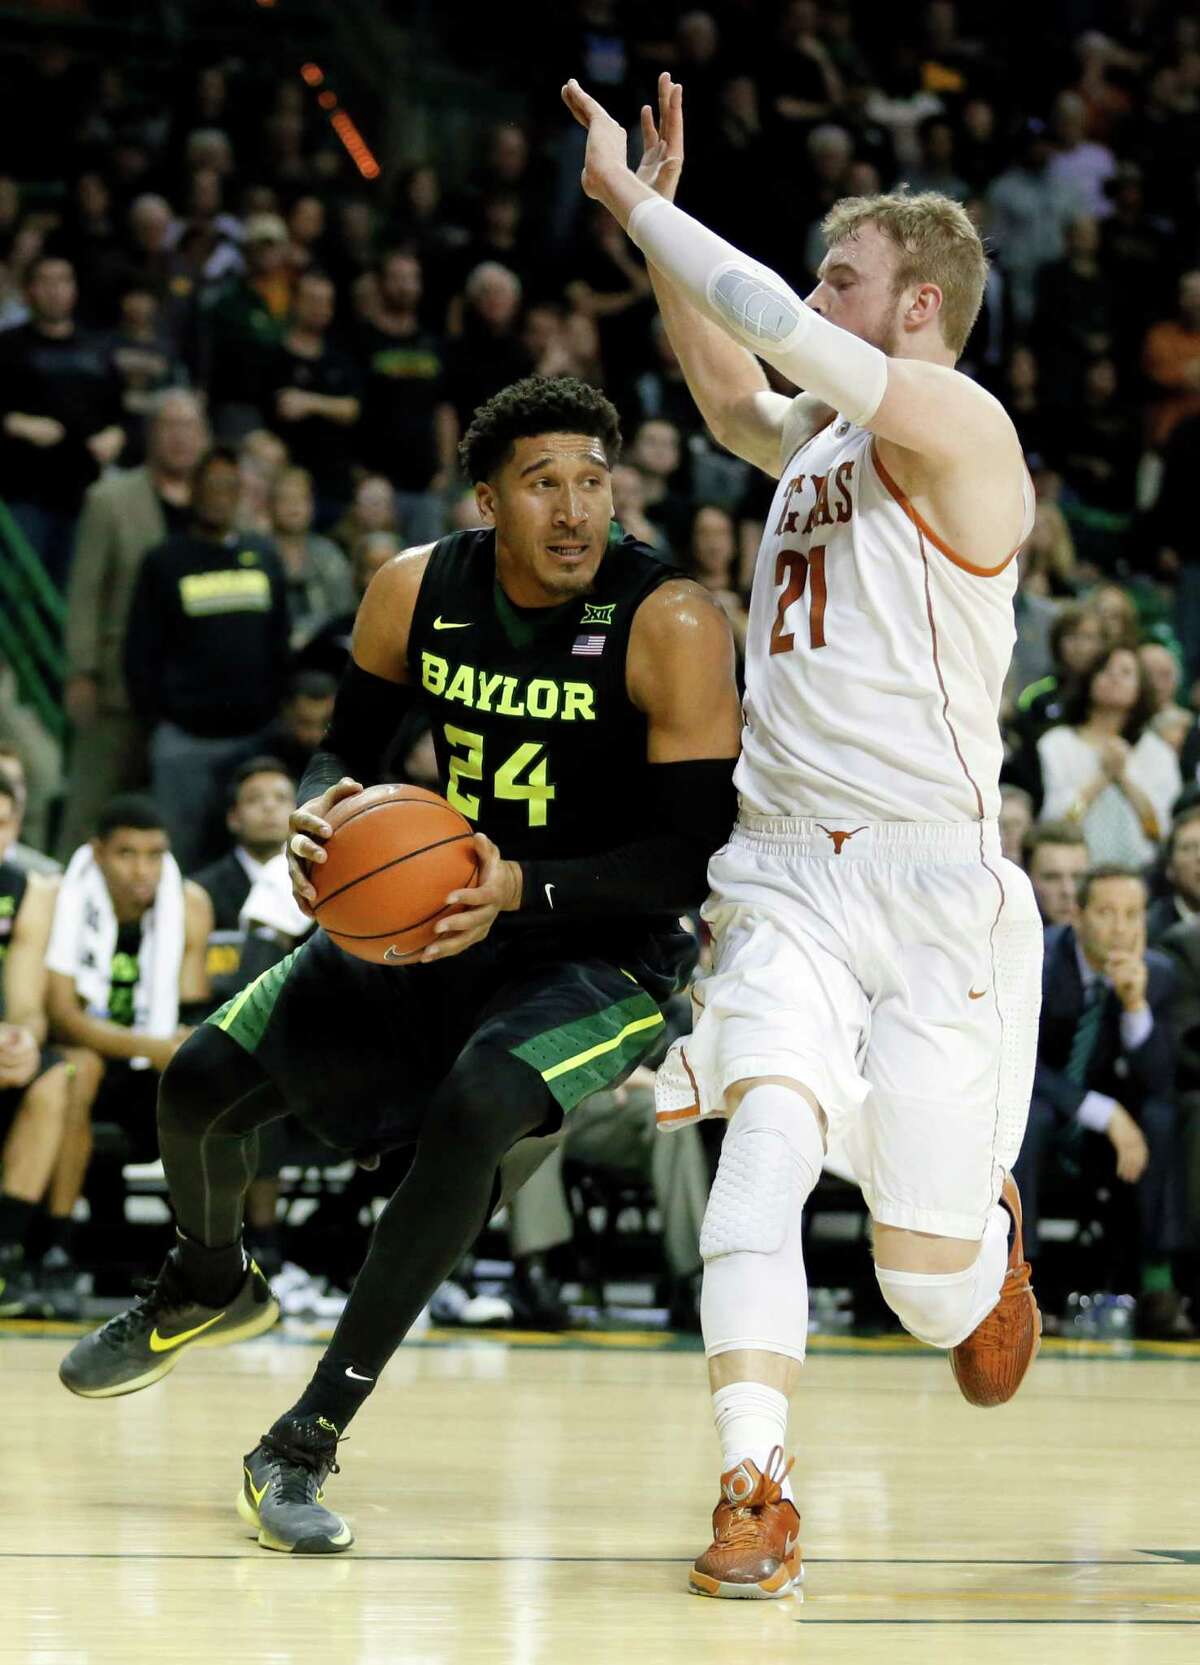 Baylor's Ishmail Wainright (24) works the baseline against Texas's Connor Lammert (21) in the second half of an NCAA college basketball game, Monday, Feb. 1, 2016, in Waco, Texas. Texas won 67-59. (AP Photo/Tony Gutierrez)